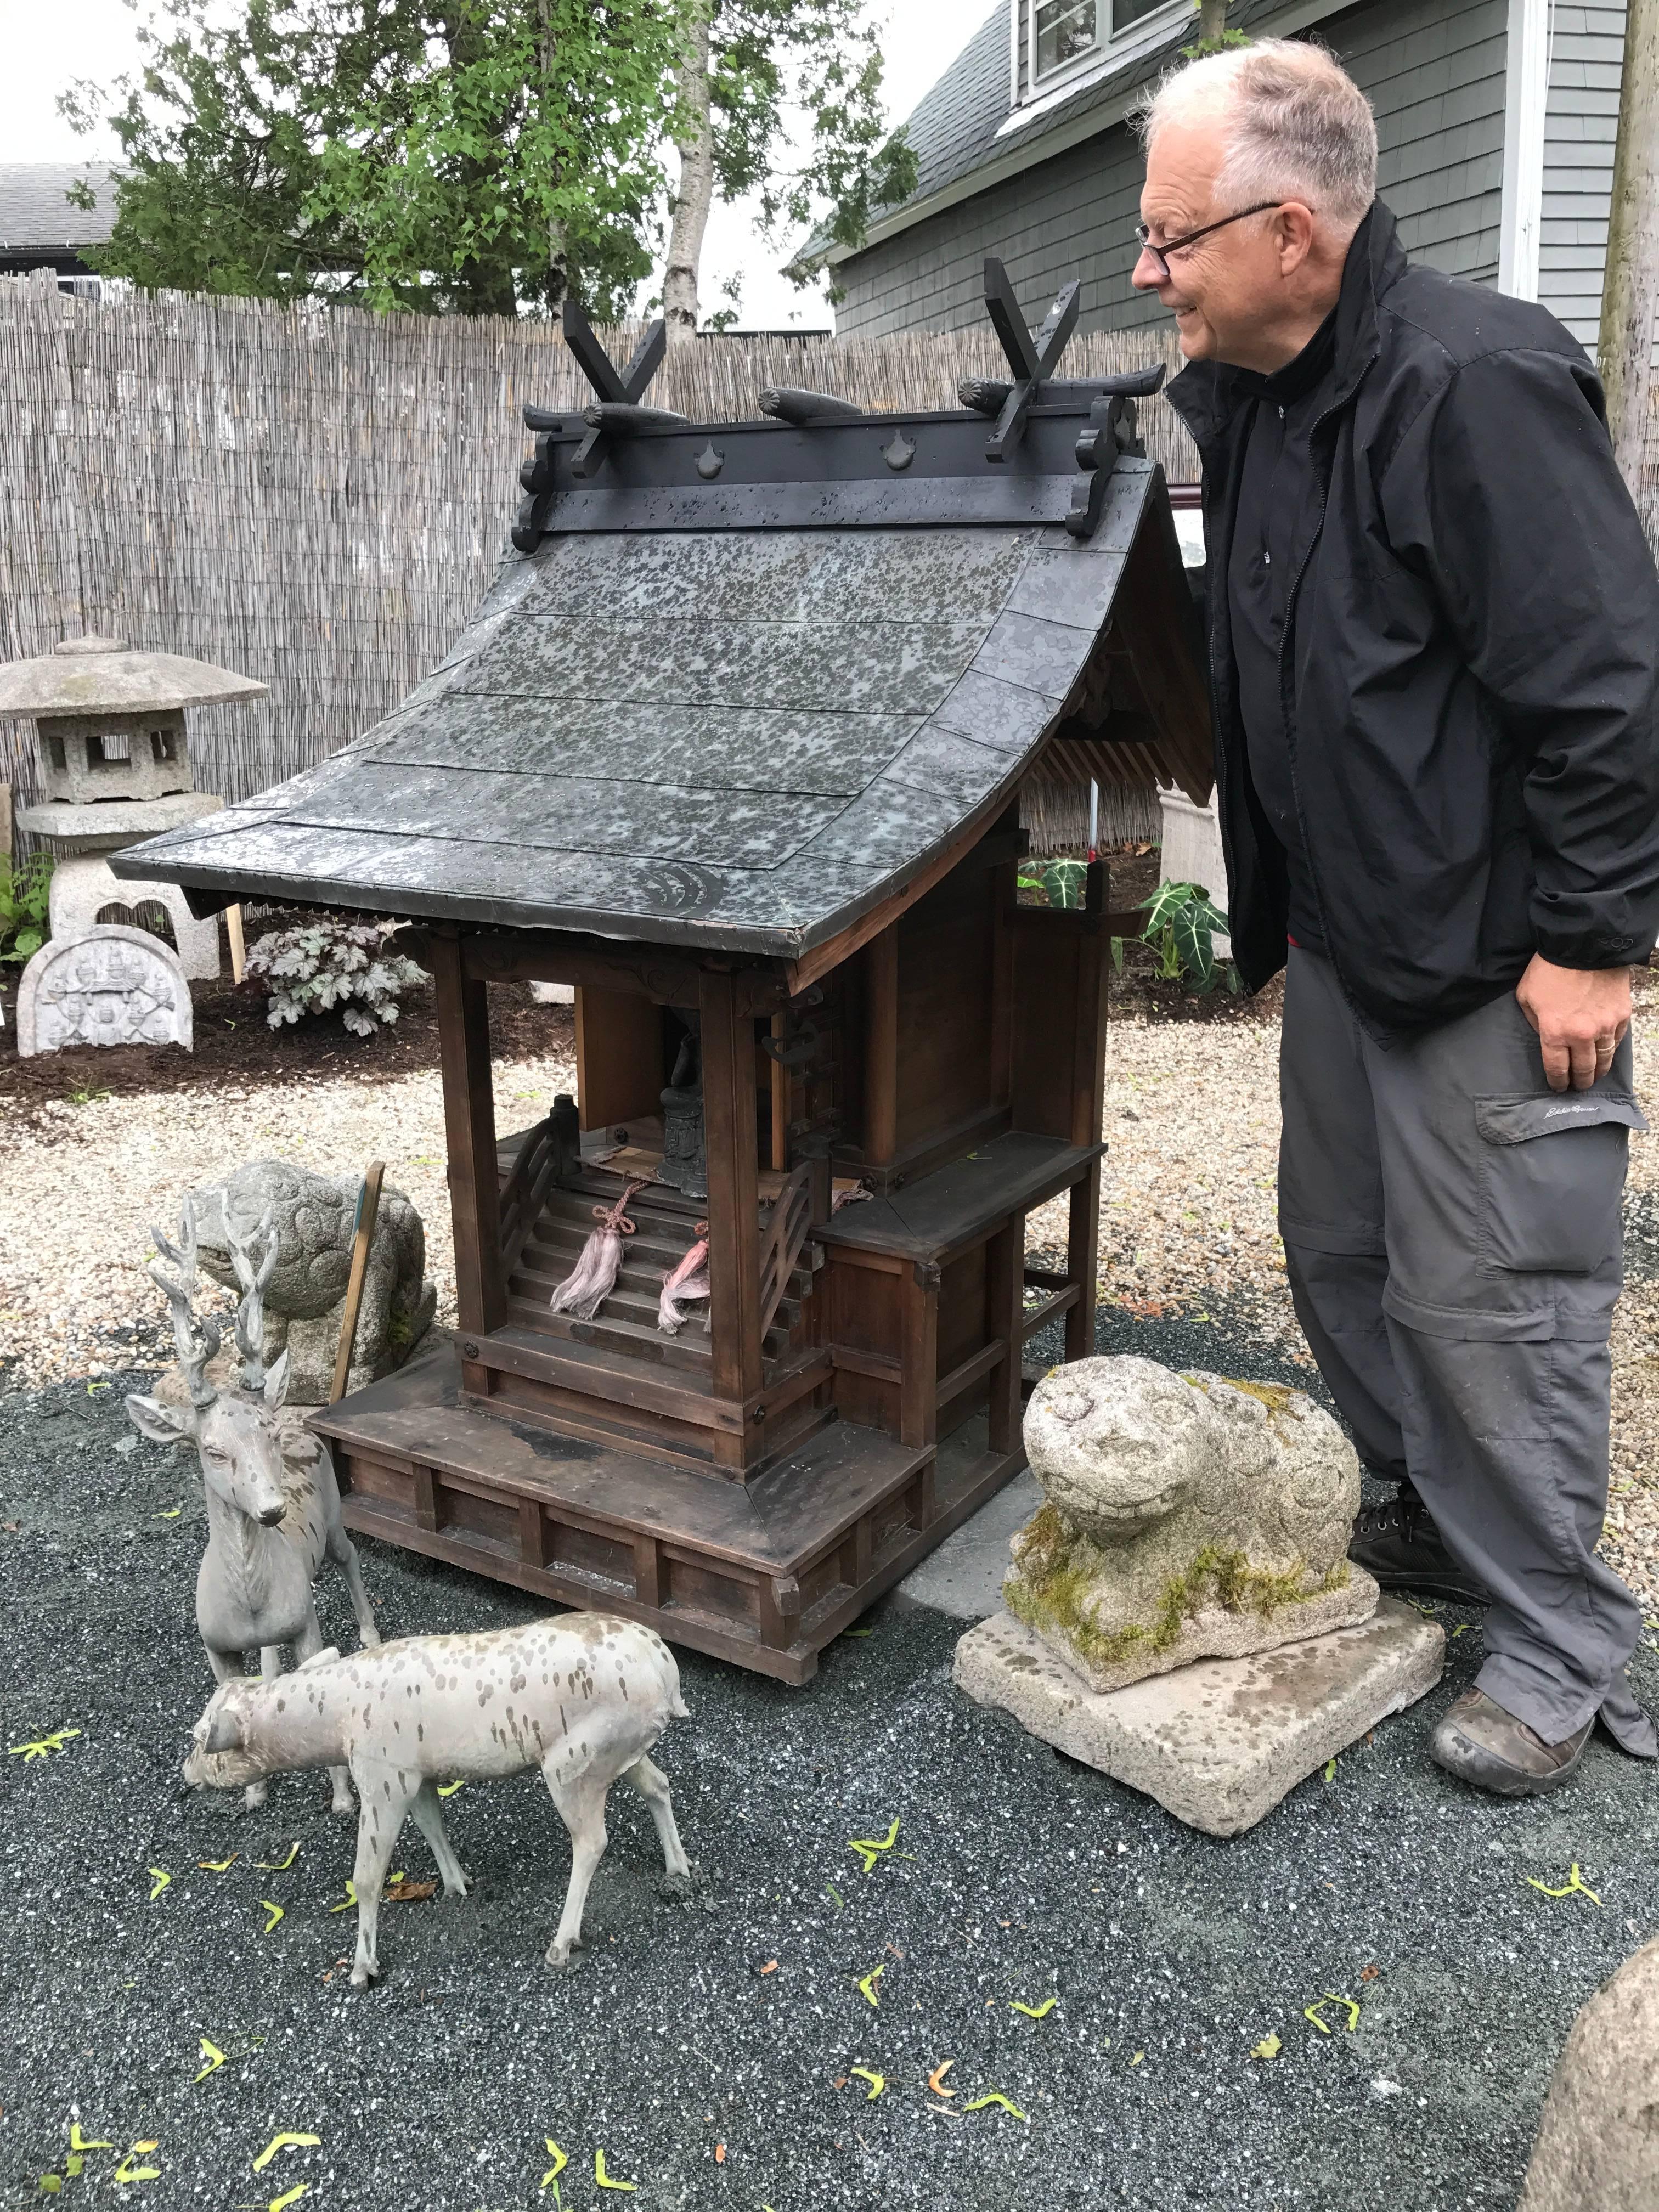 Here's a beautiful and serene way to accent your special indoor shrine space or outdoor garden space with this rare architectural treasure from Japan.

Enjoy this antique 19th century Japanese antique hand made copper roofed and Hinoki wood shrine.